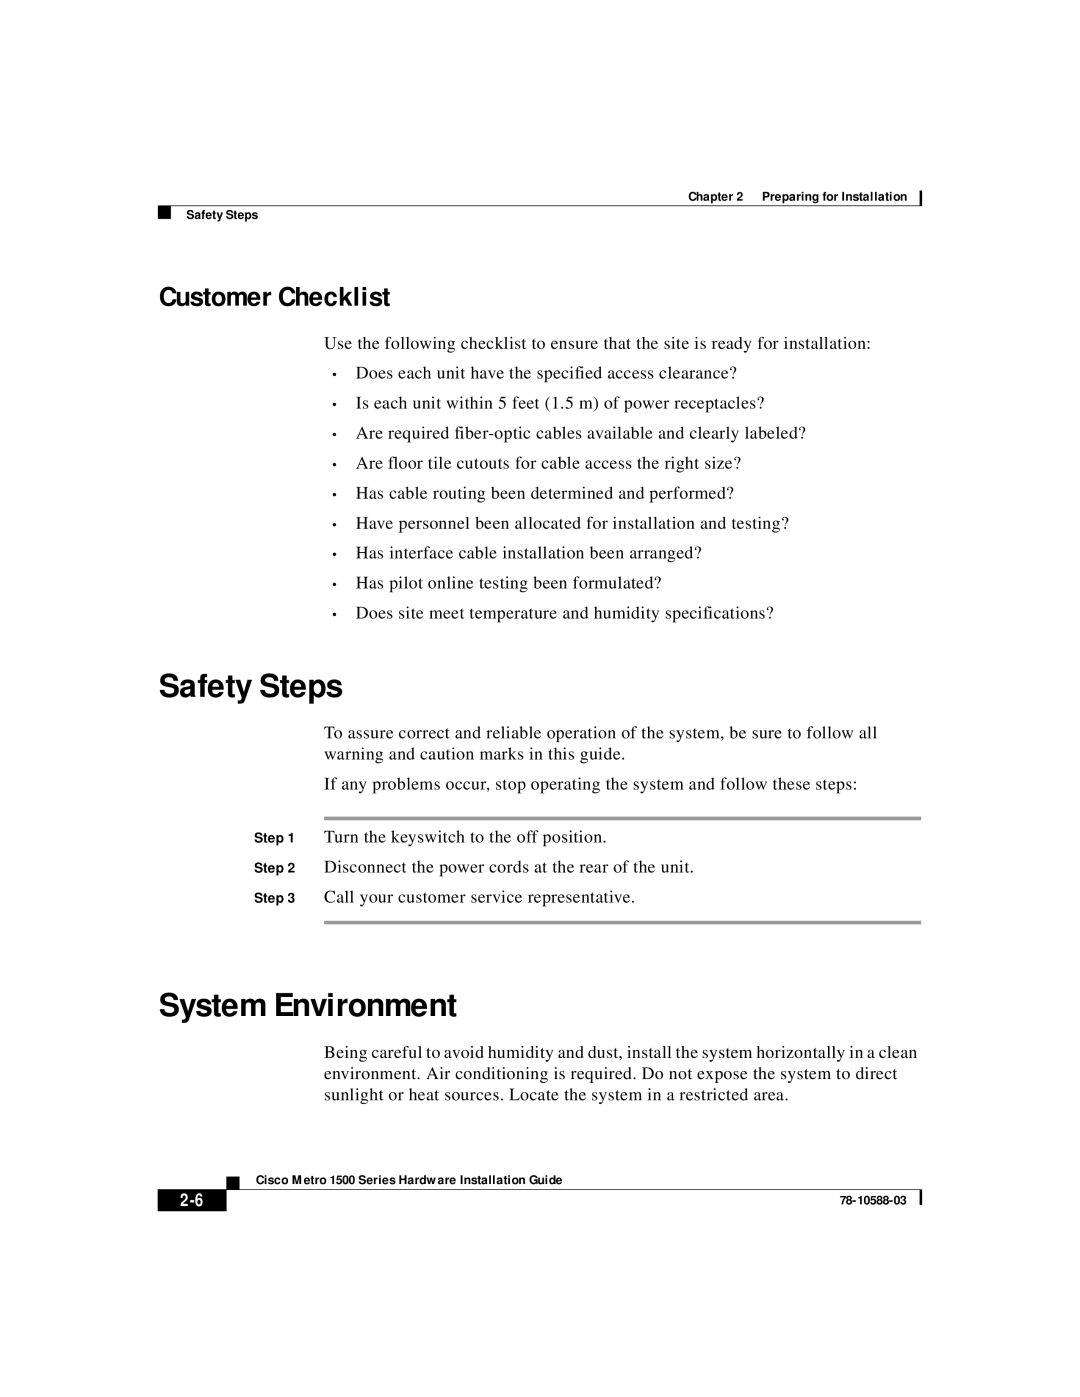 Cisco Systems 1500 manual Safety Steps, System Environment, Customer Checklist 